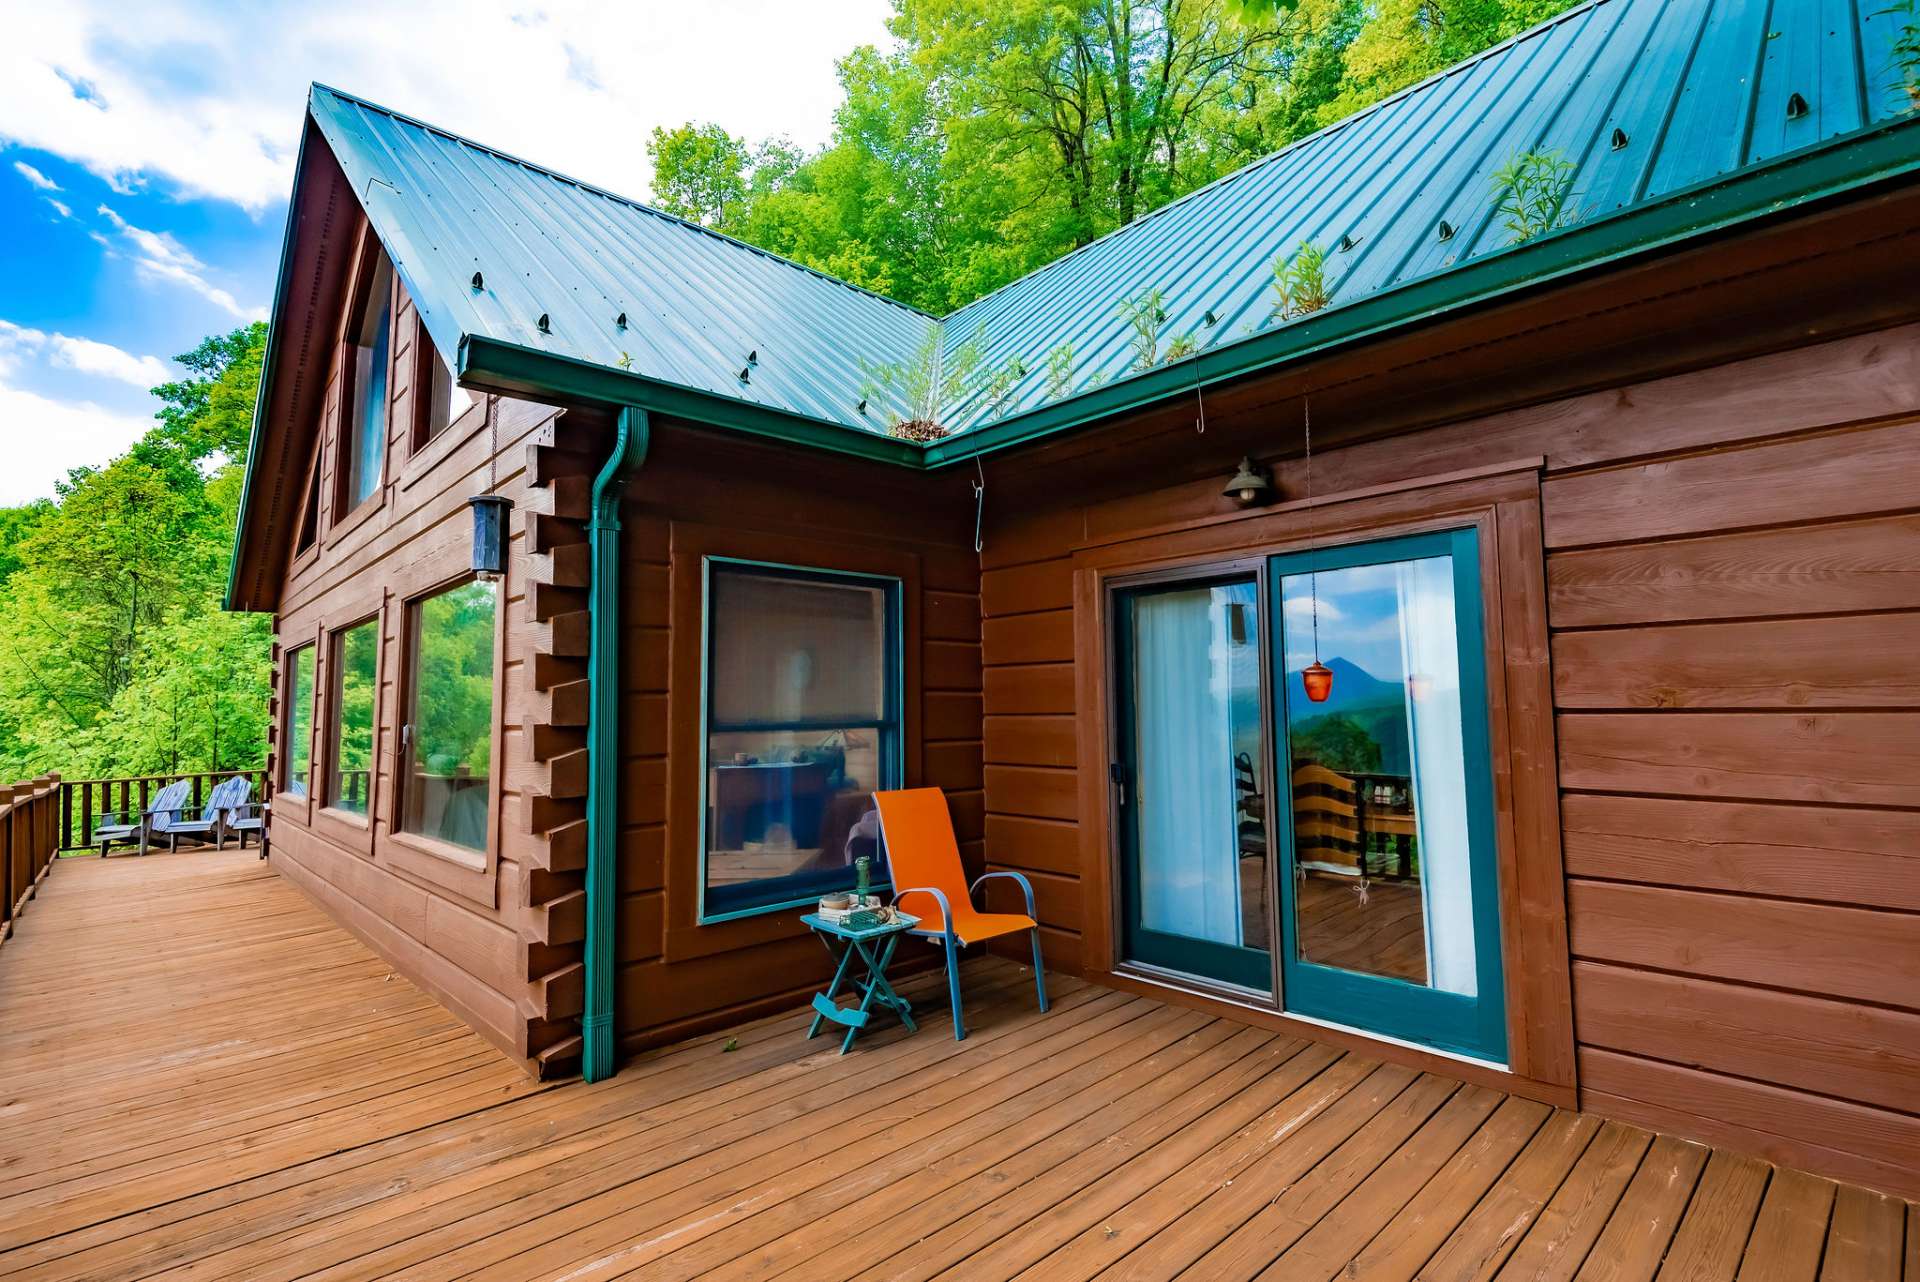 Enjoy the views and outdoor entertaining on the partially covered wrap deck.